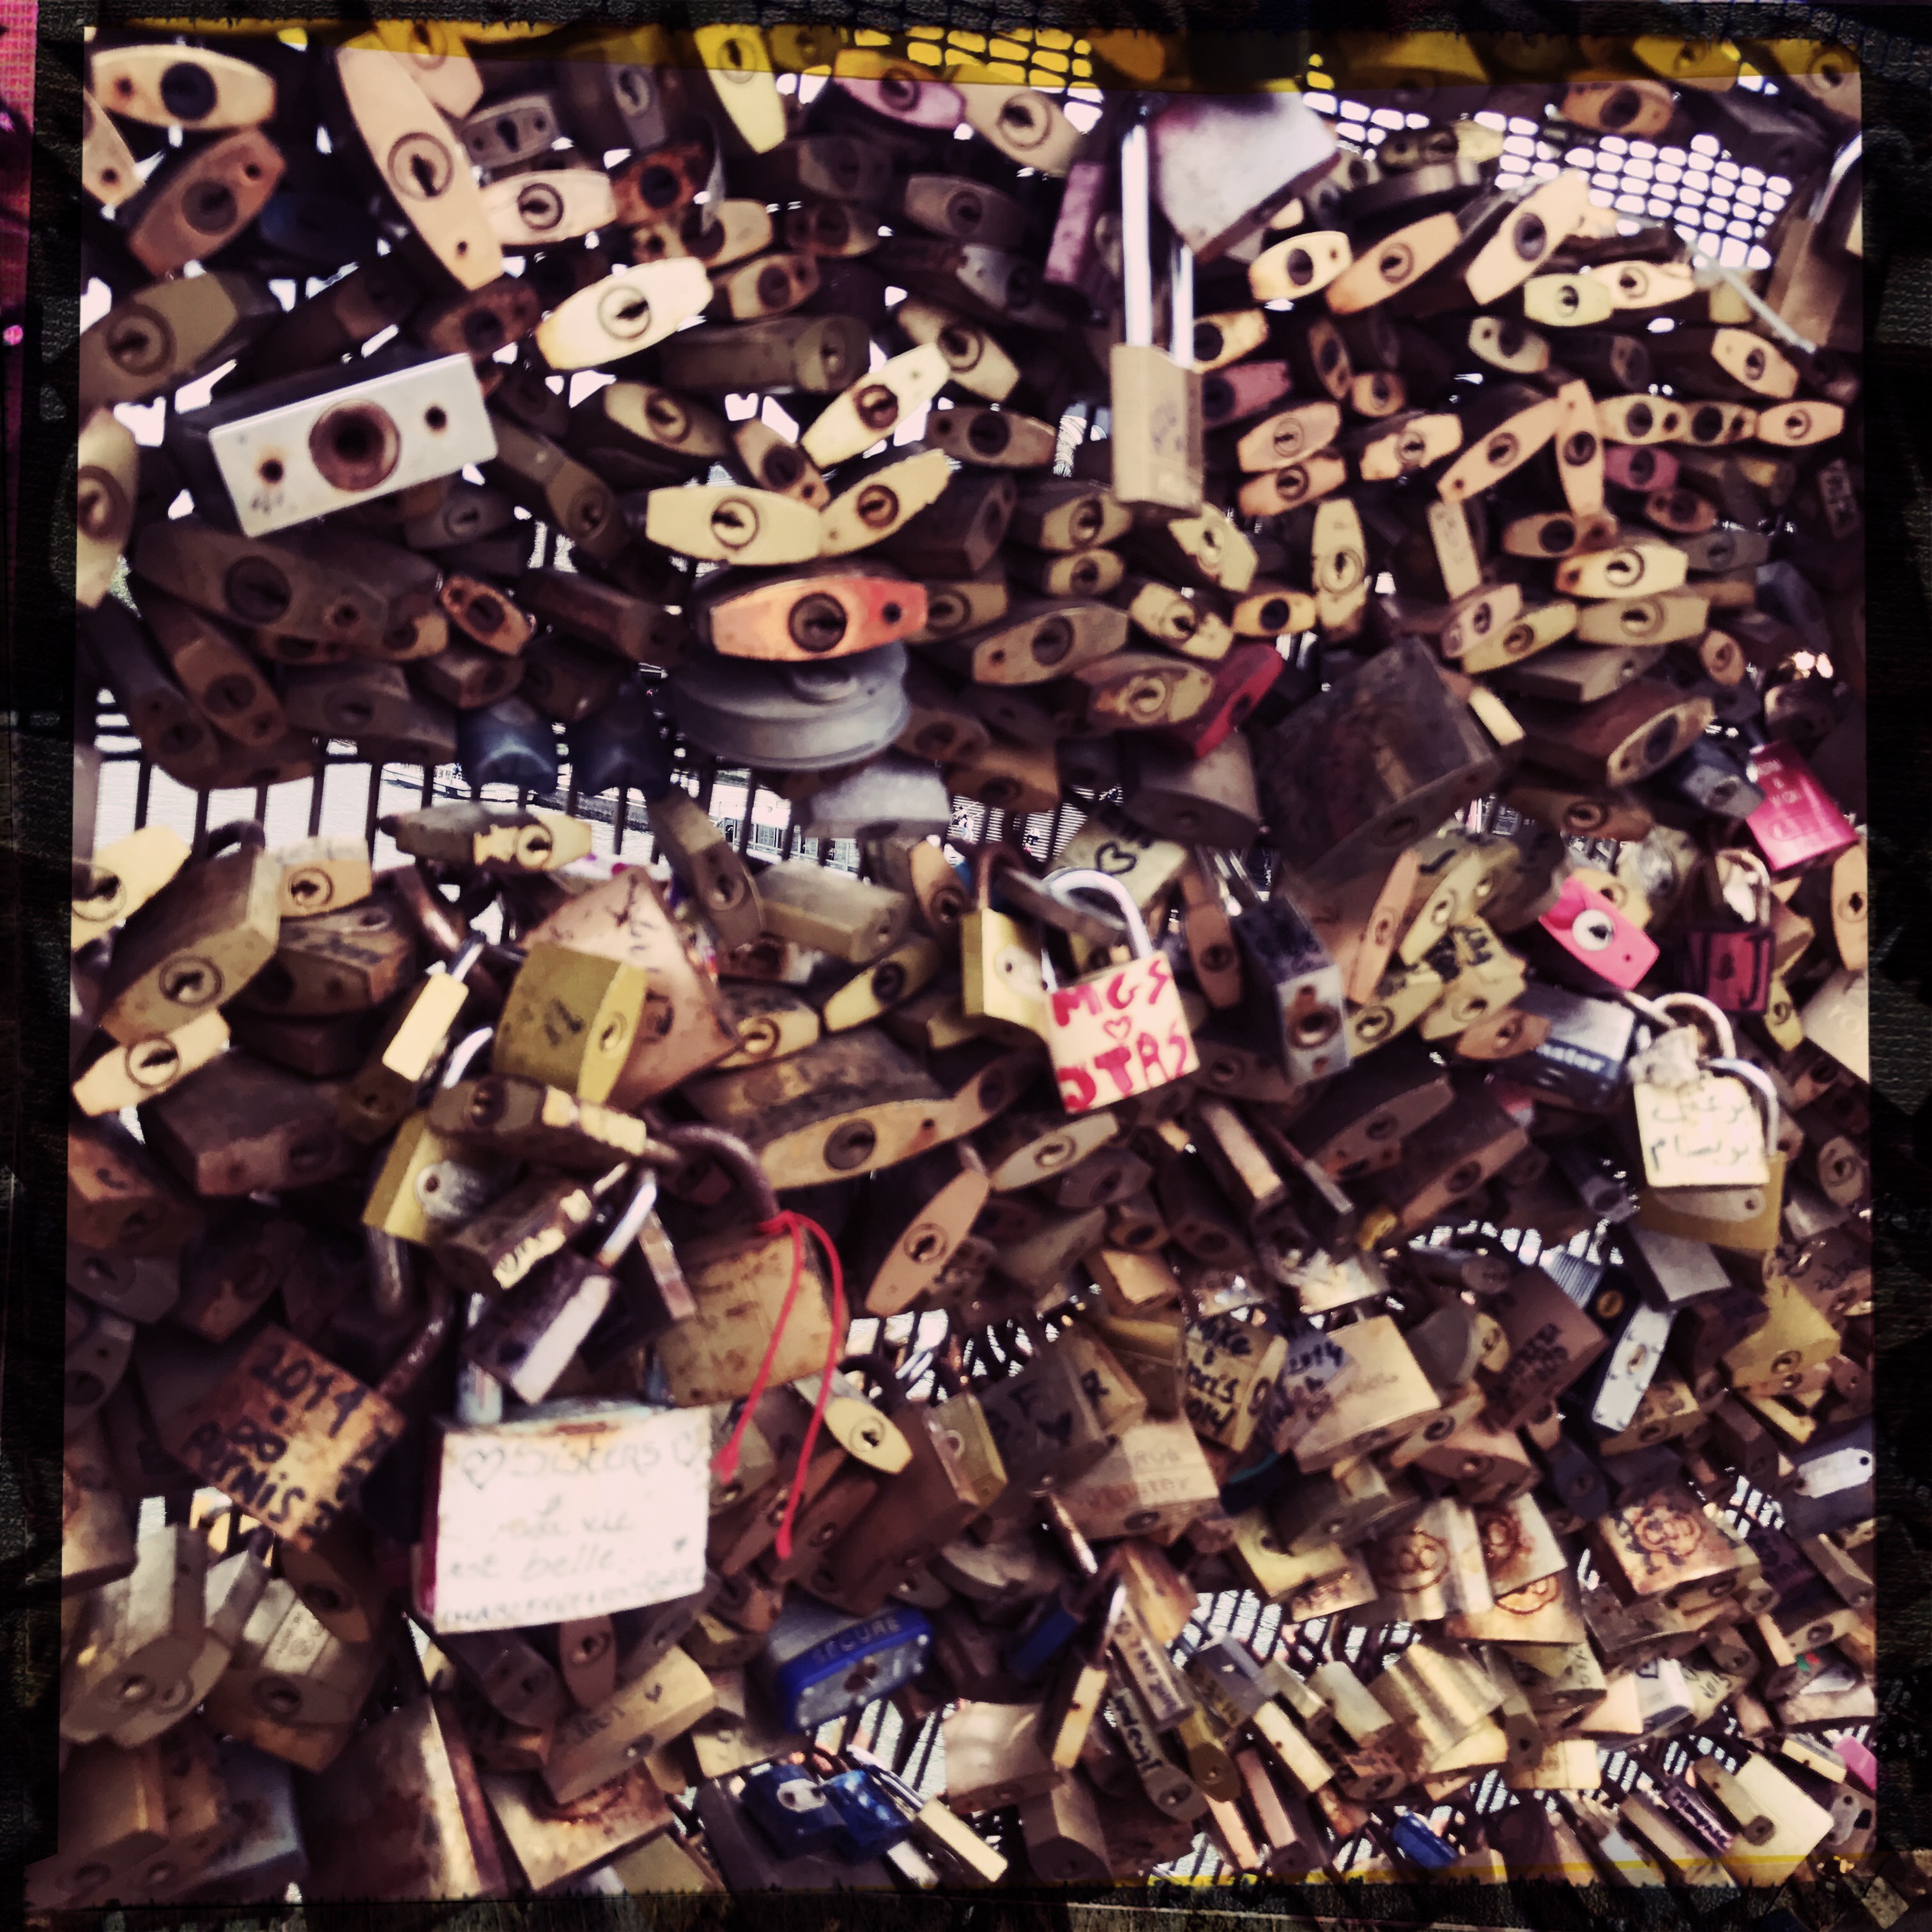 A photo of the padlocks on Pont des Arts in Paris - there are so many padlocks that you can’t see anything else